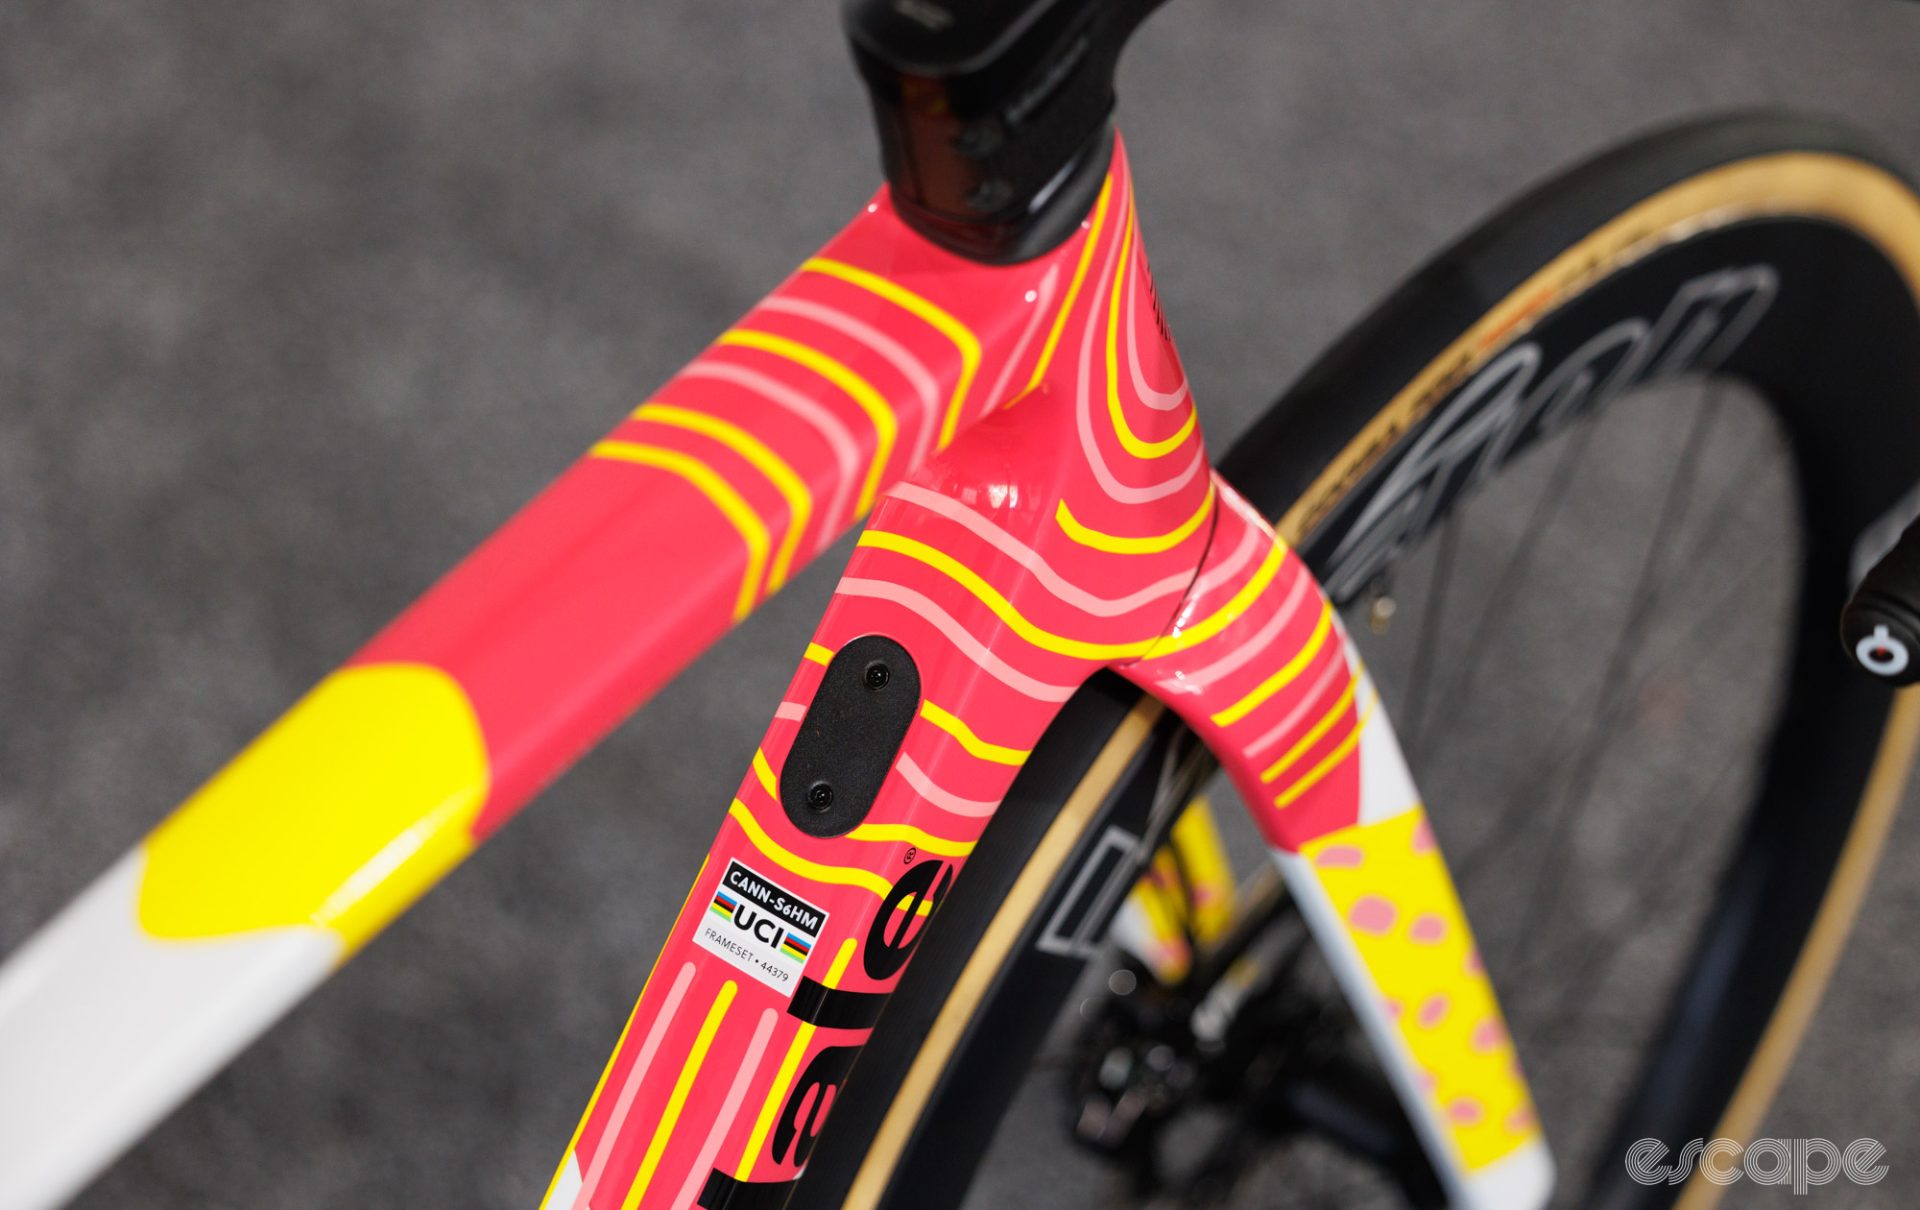 The colorful paint hides some aero features like a squared-off down tube. A Di2 control port is also shown.